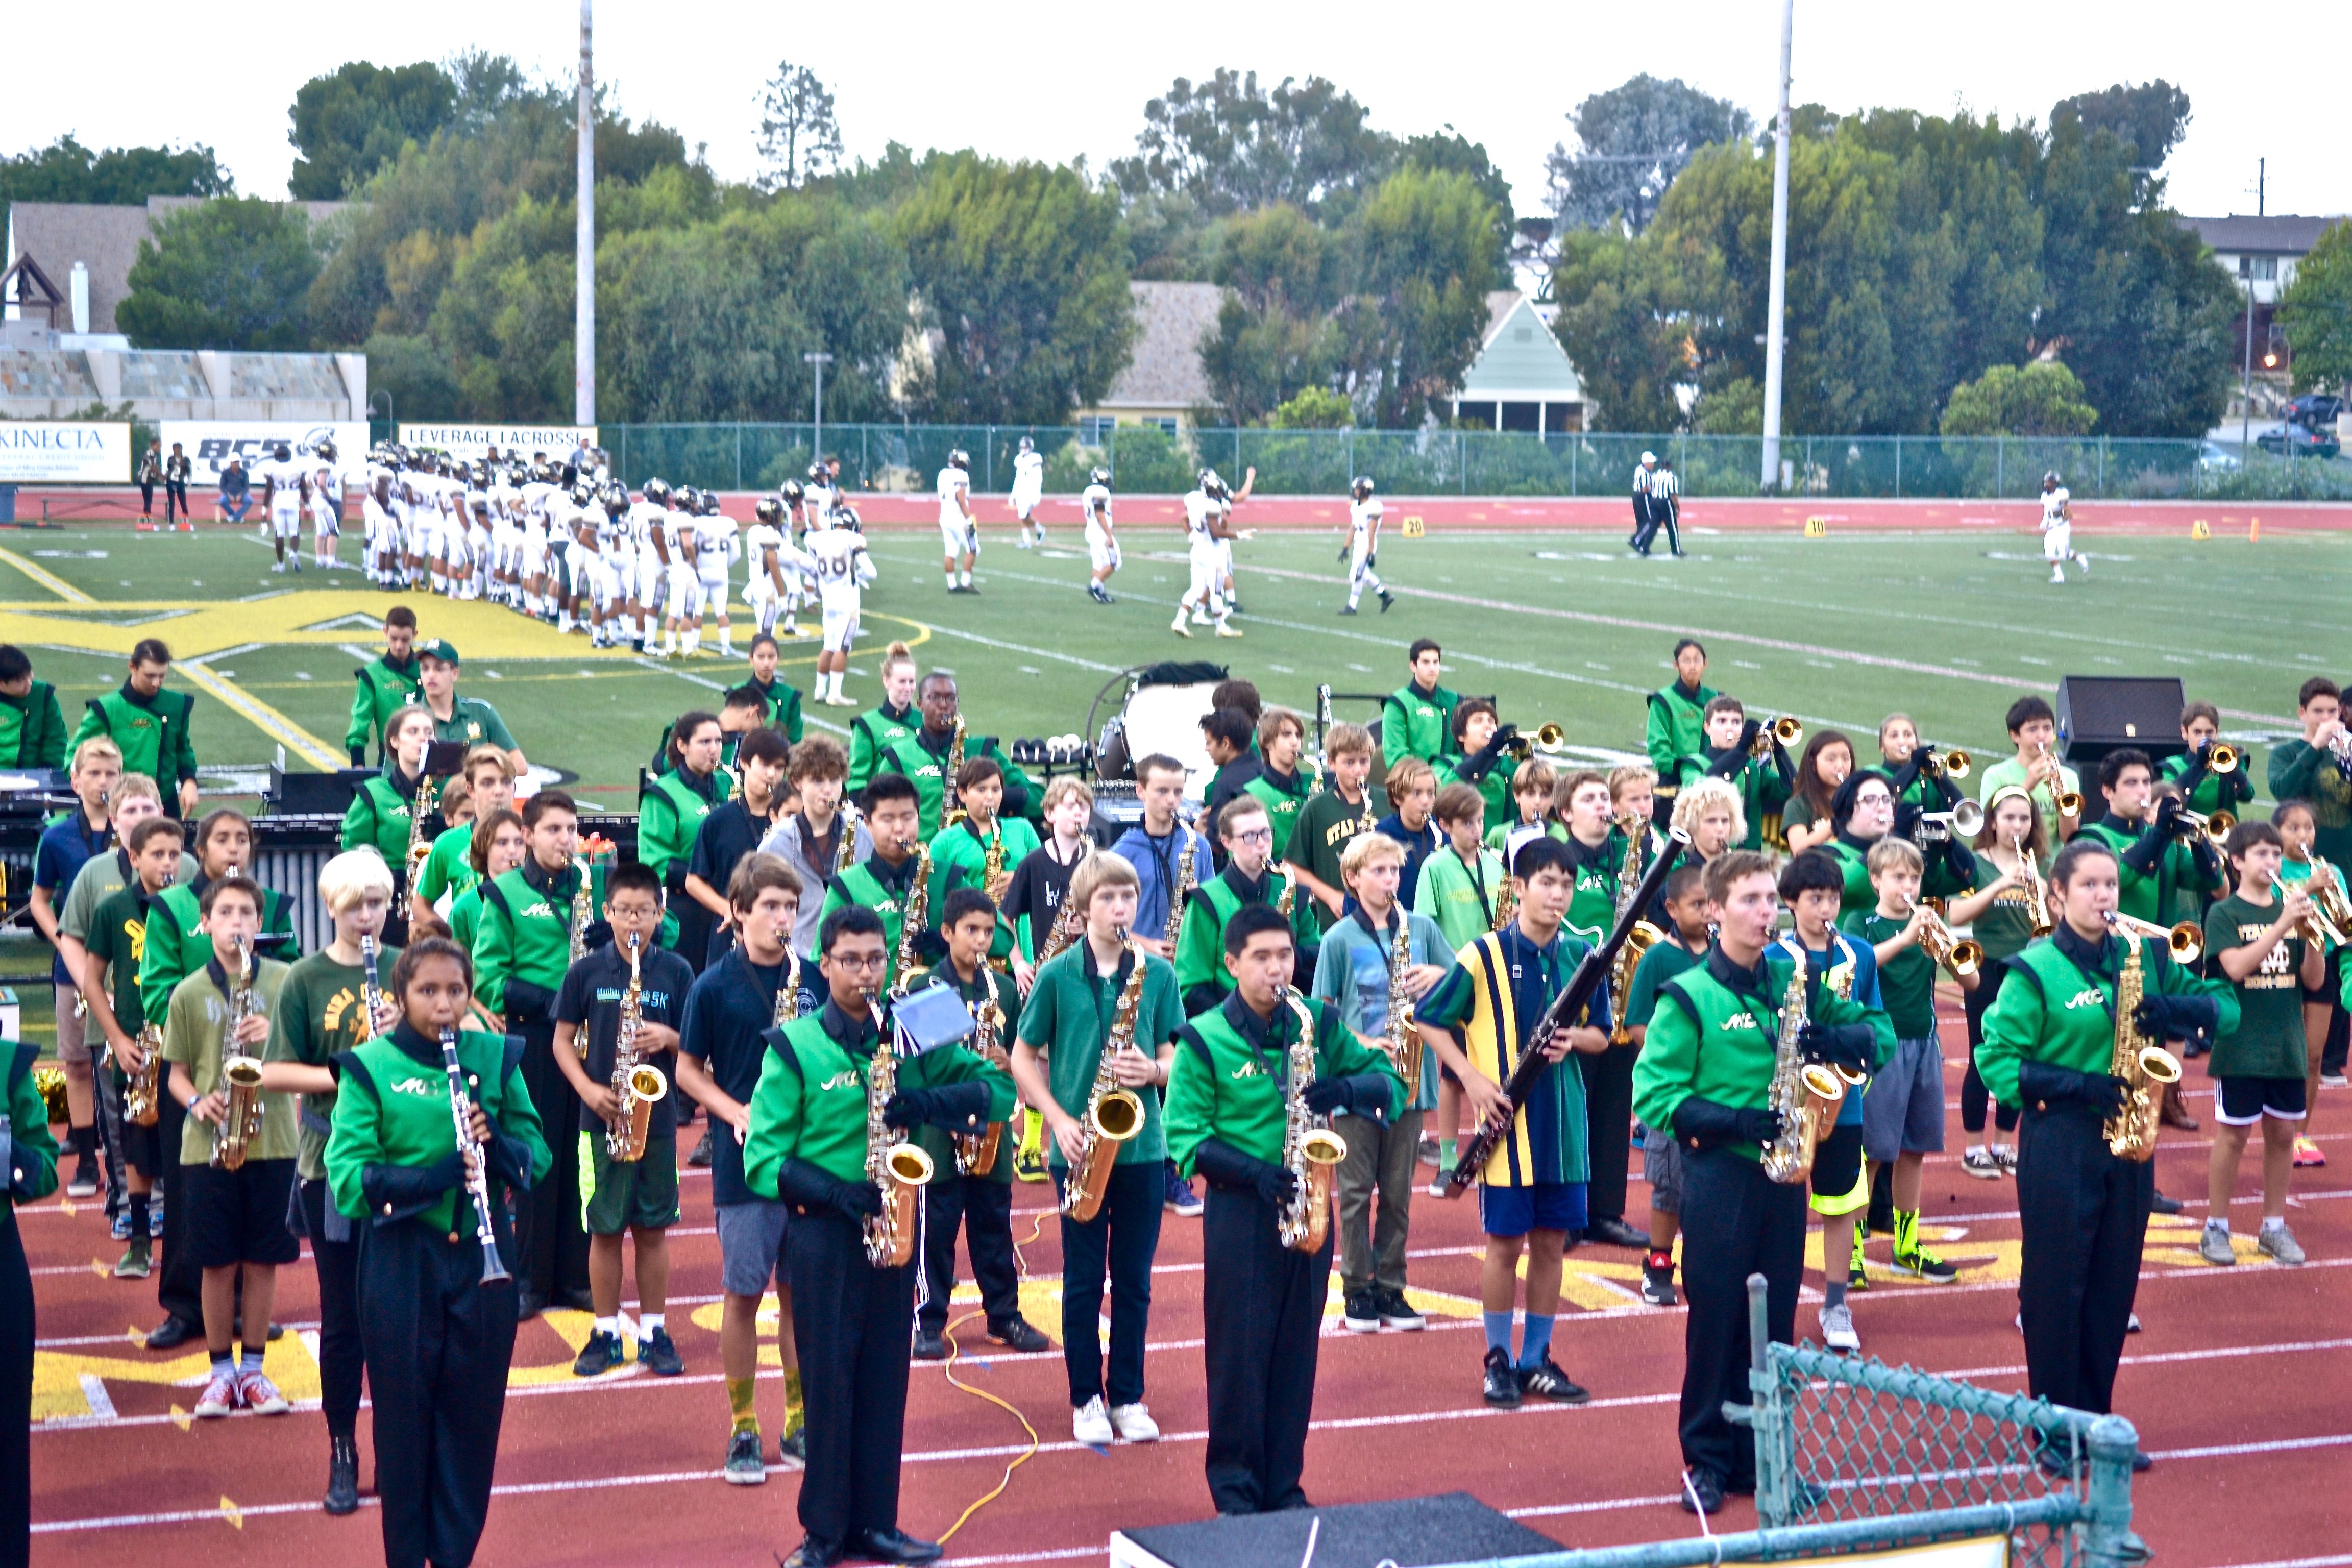 Mira Costa, MBMS Bands Join Together for 'Green and Gold Day' DigMB